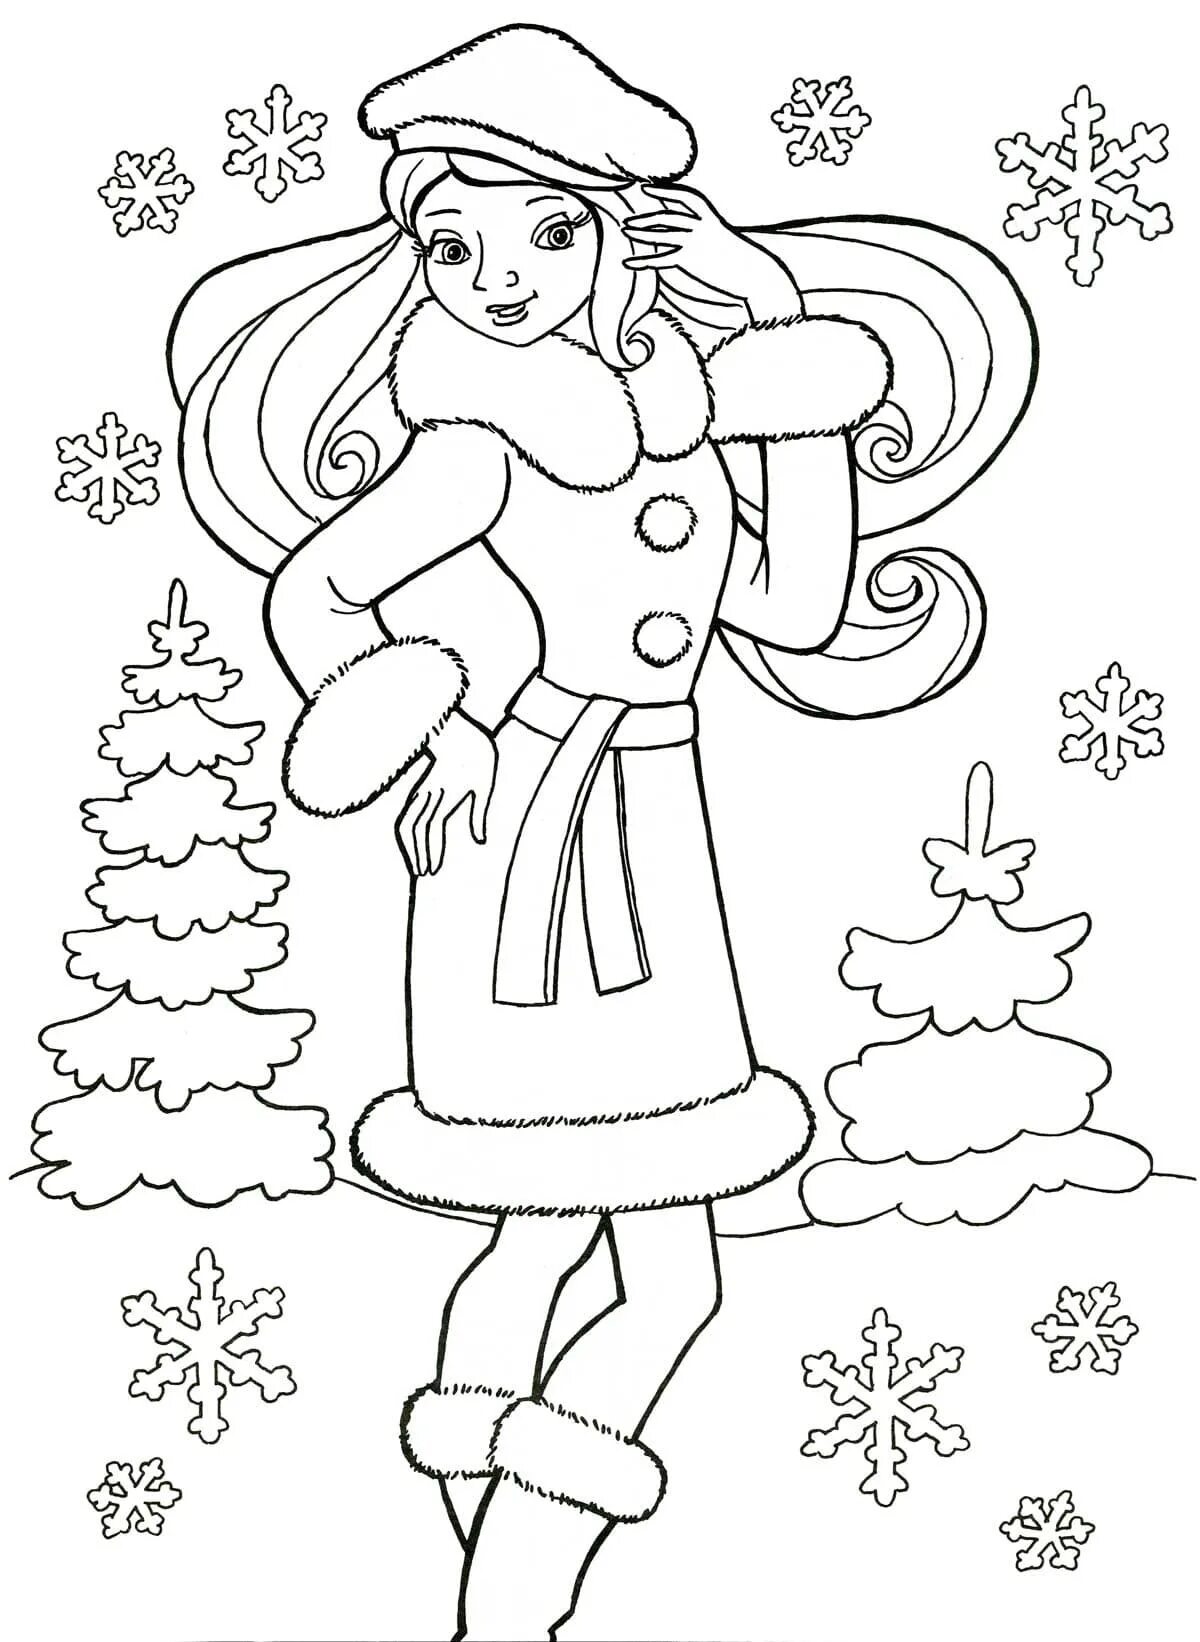 Wonderful coloring for girls winter